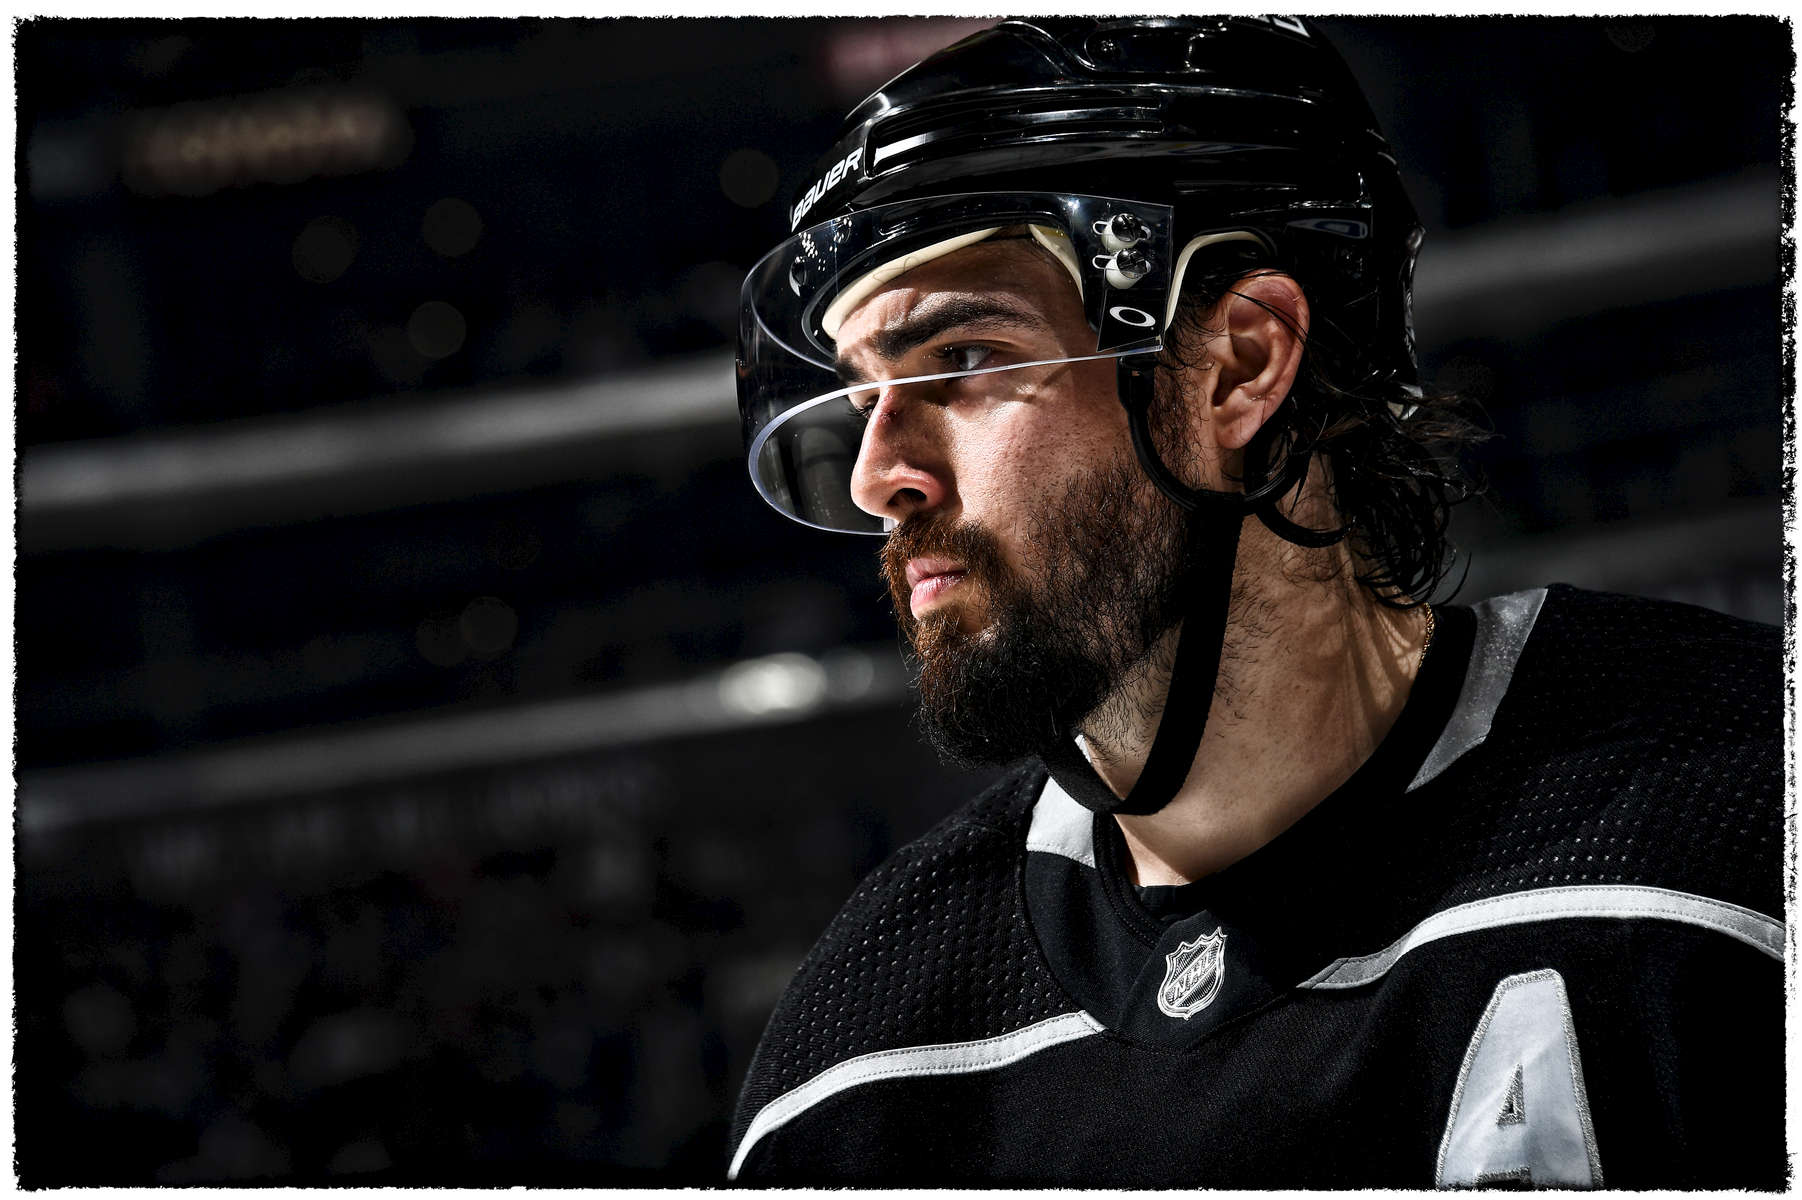 Photographed for Los Angeles Kings / NHL/ Bernstein Associates Inc.